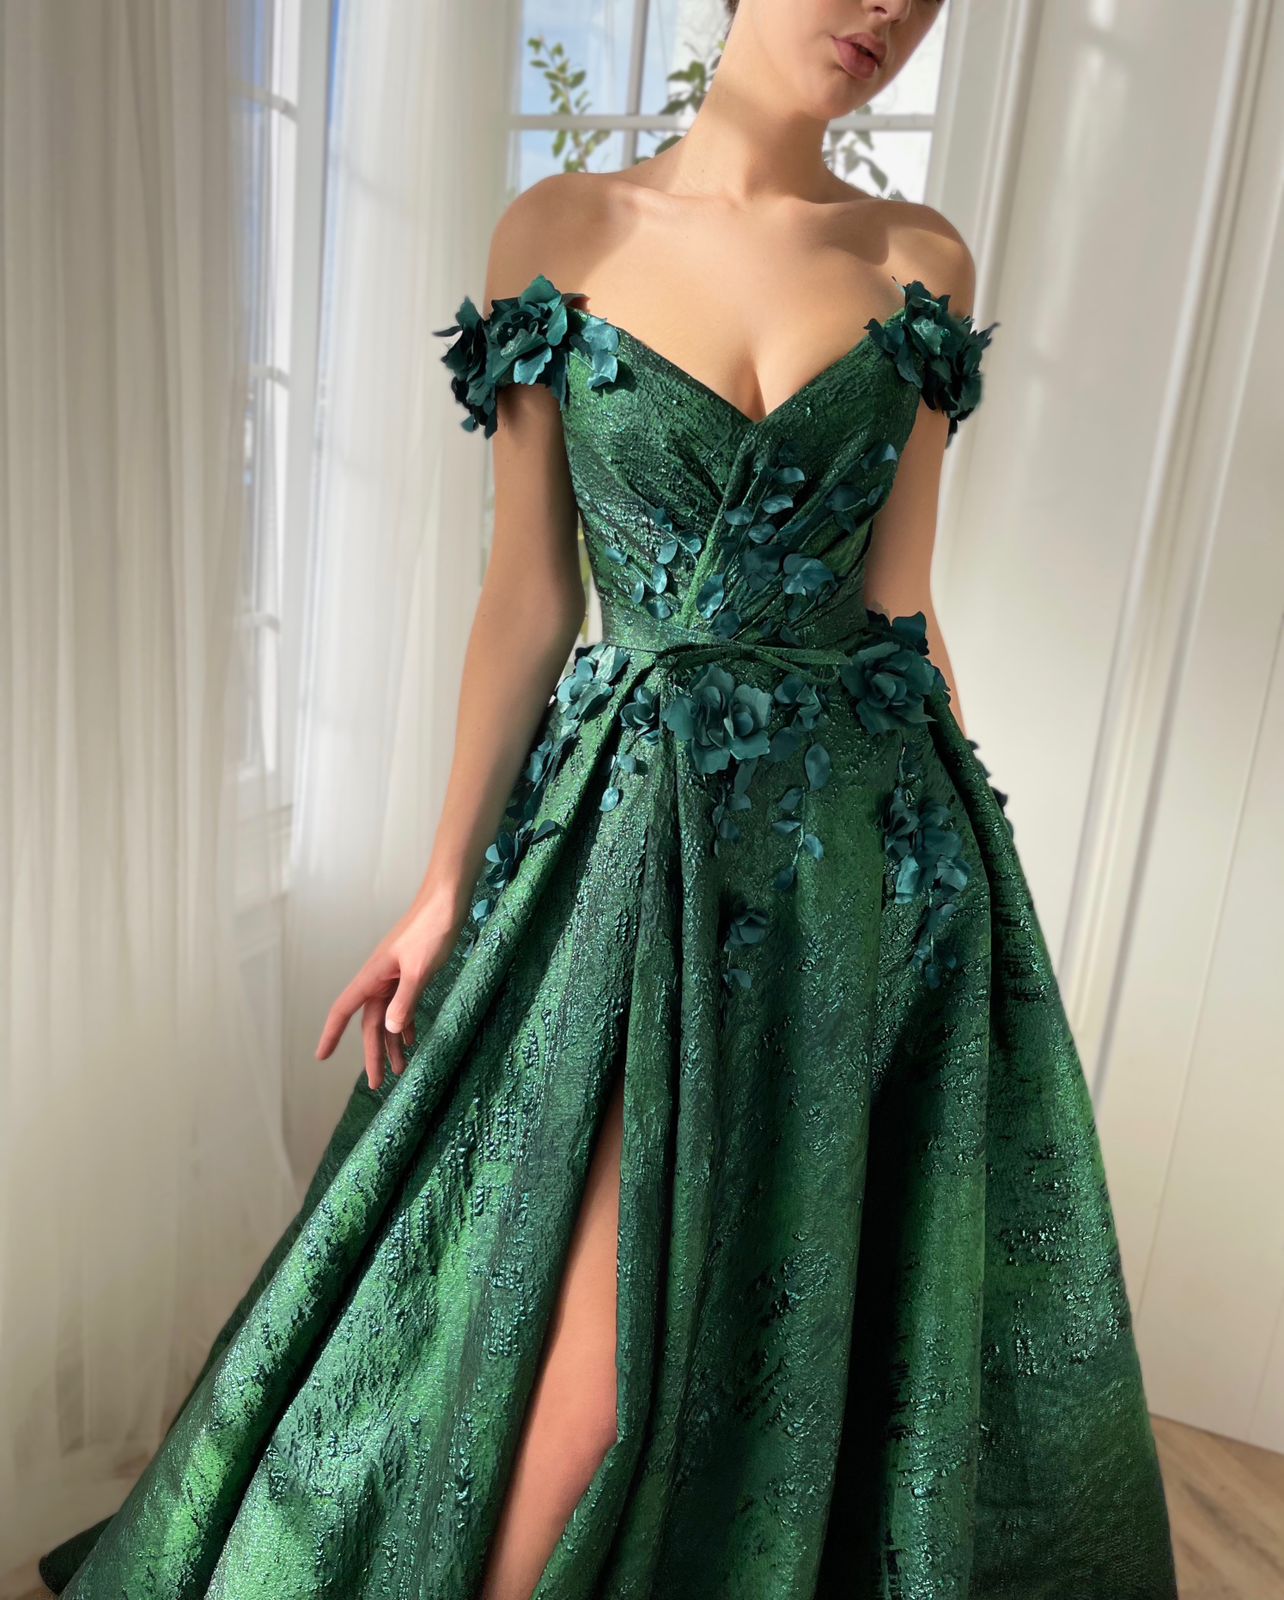 Green A-Line dress with off the shoulder sleeves, flowers and embroidery